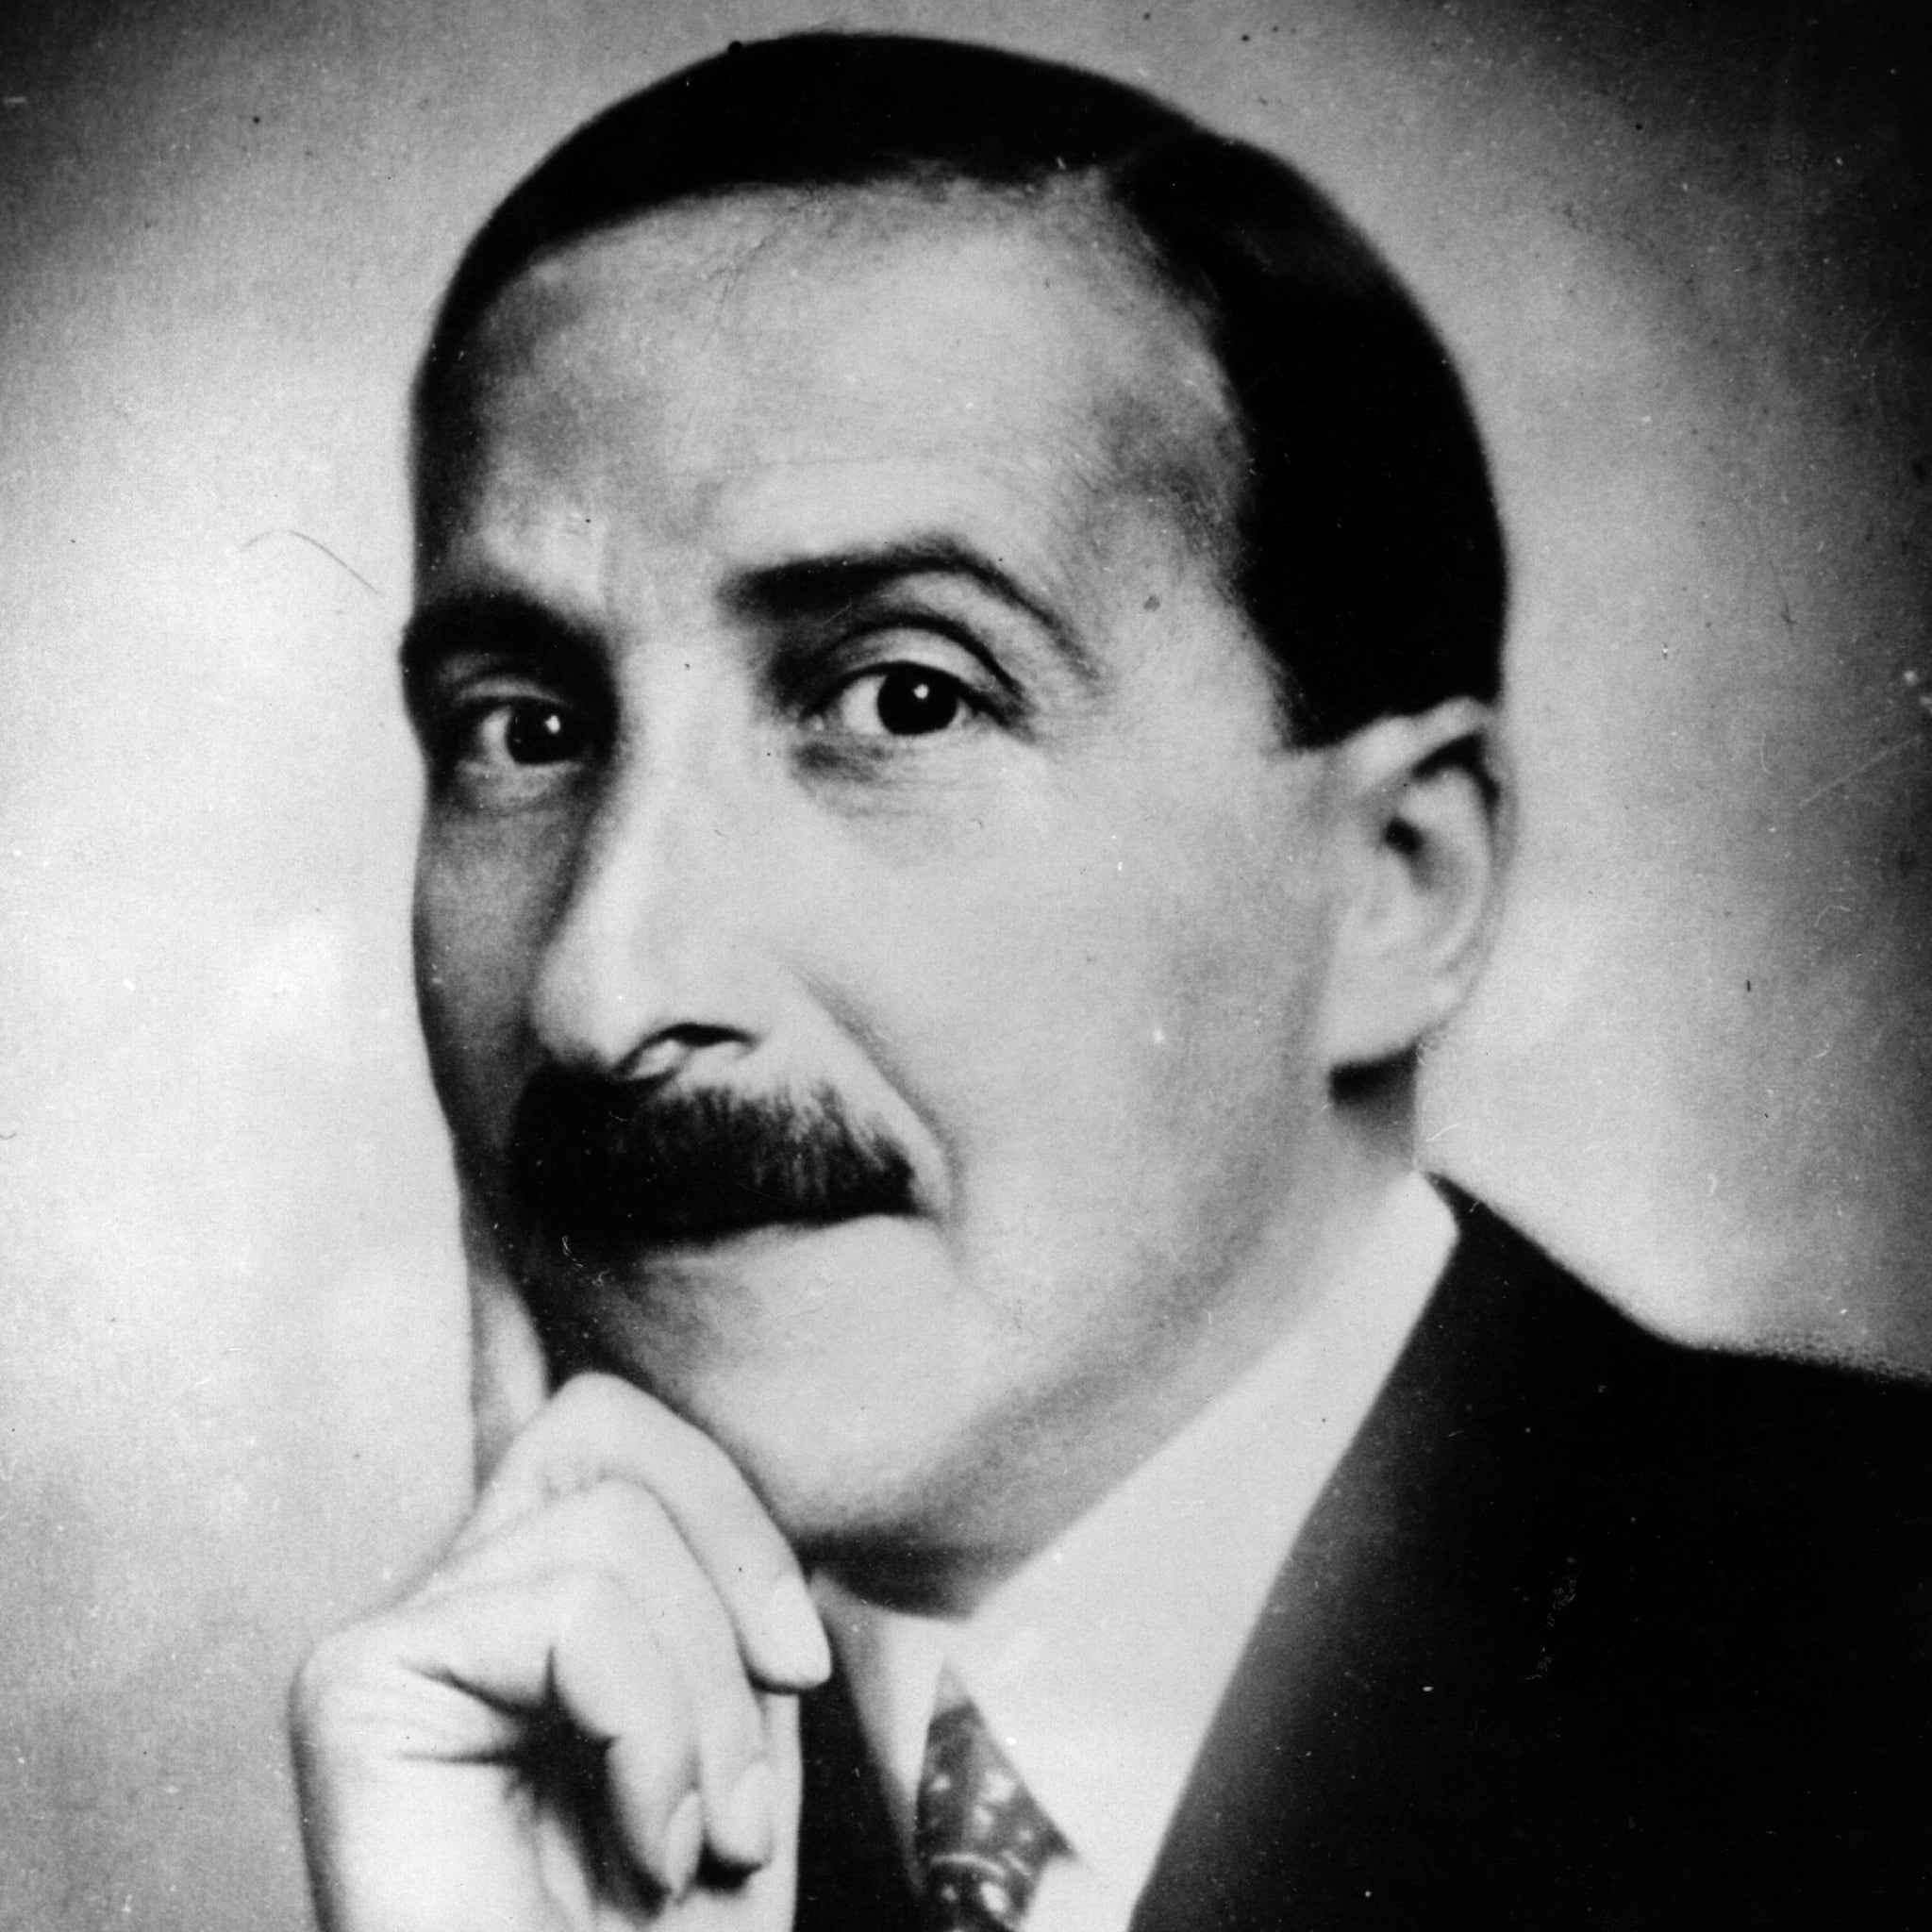 Circa 1940: Stefan Zweig (1881 - 1942) the writer, poet and translator of Ben Johnson. (Photo by Hulton Archive/Getty Images)